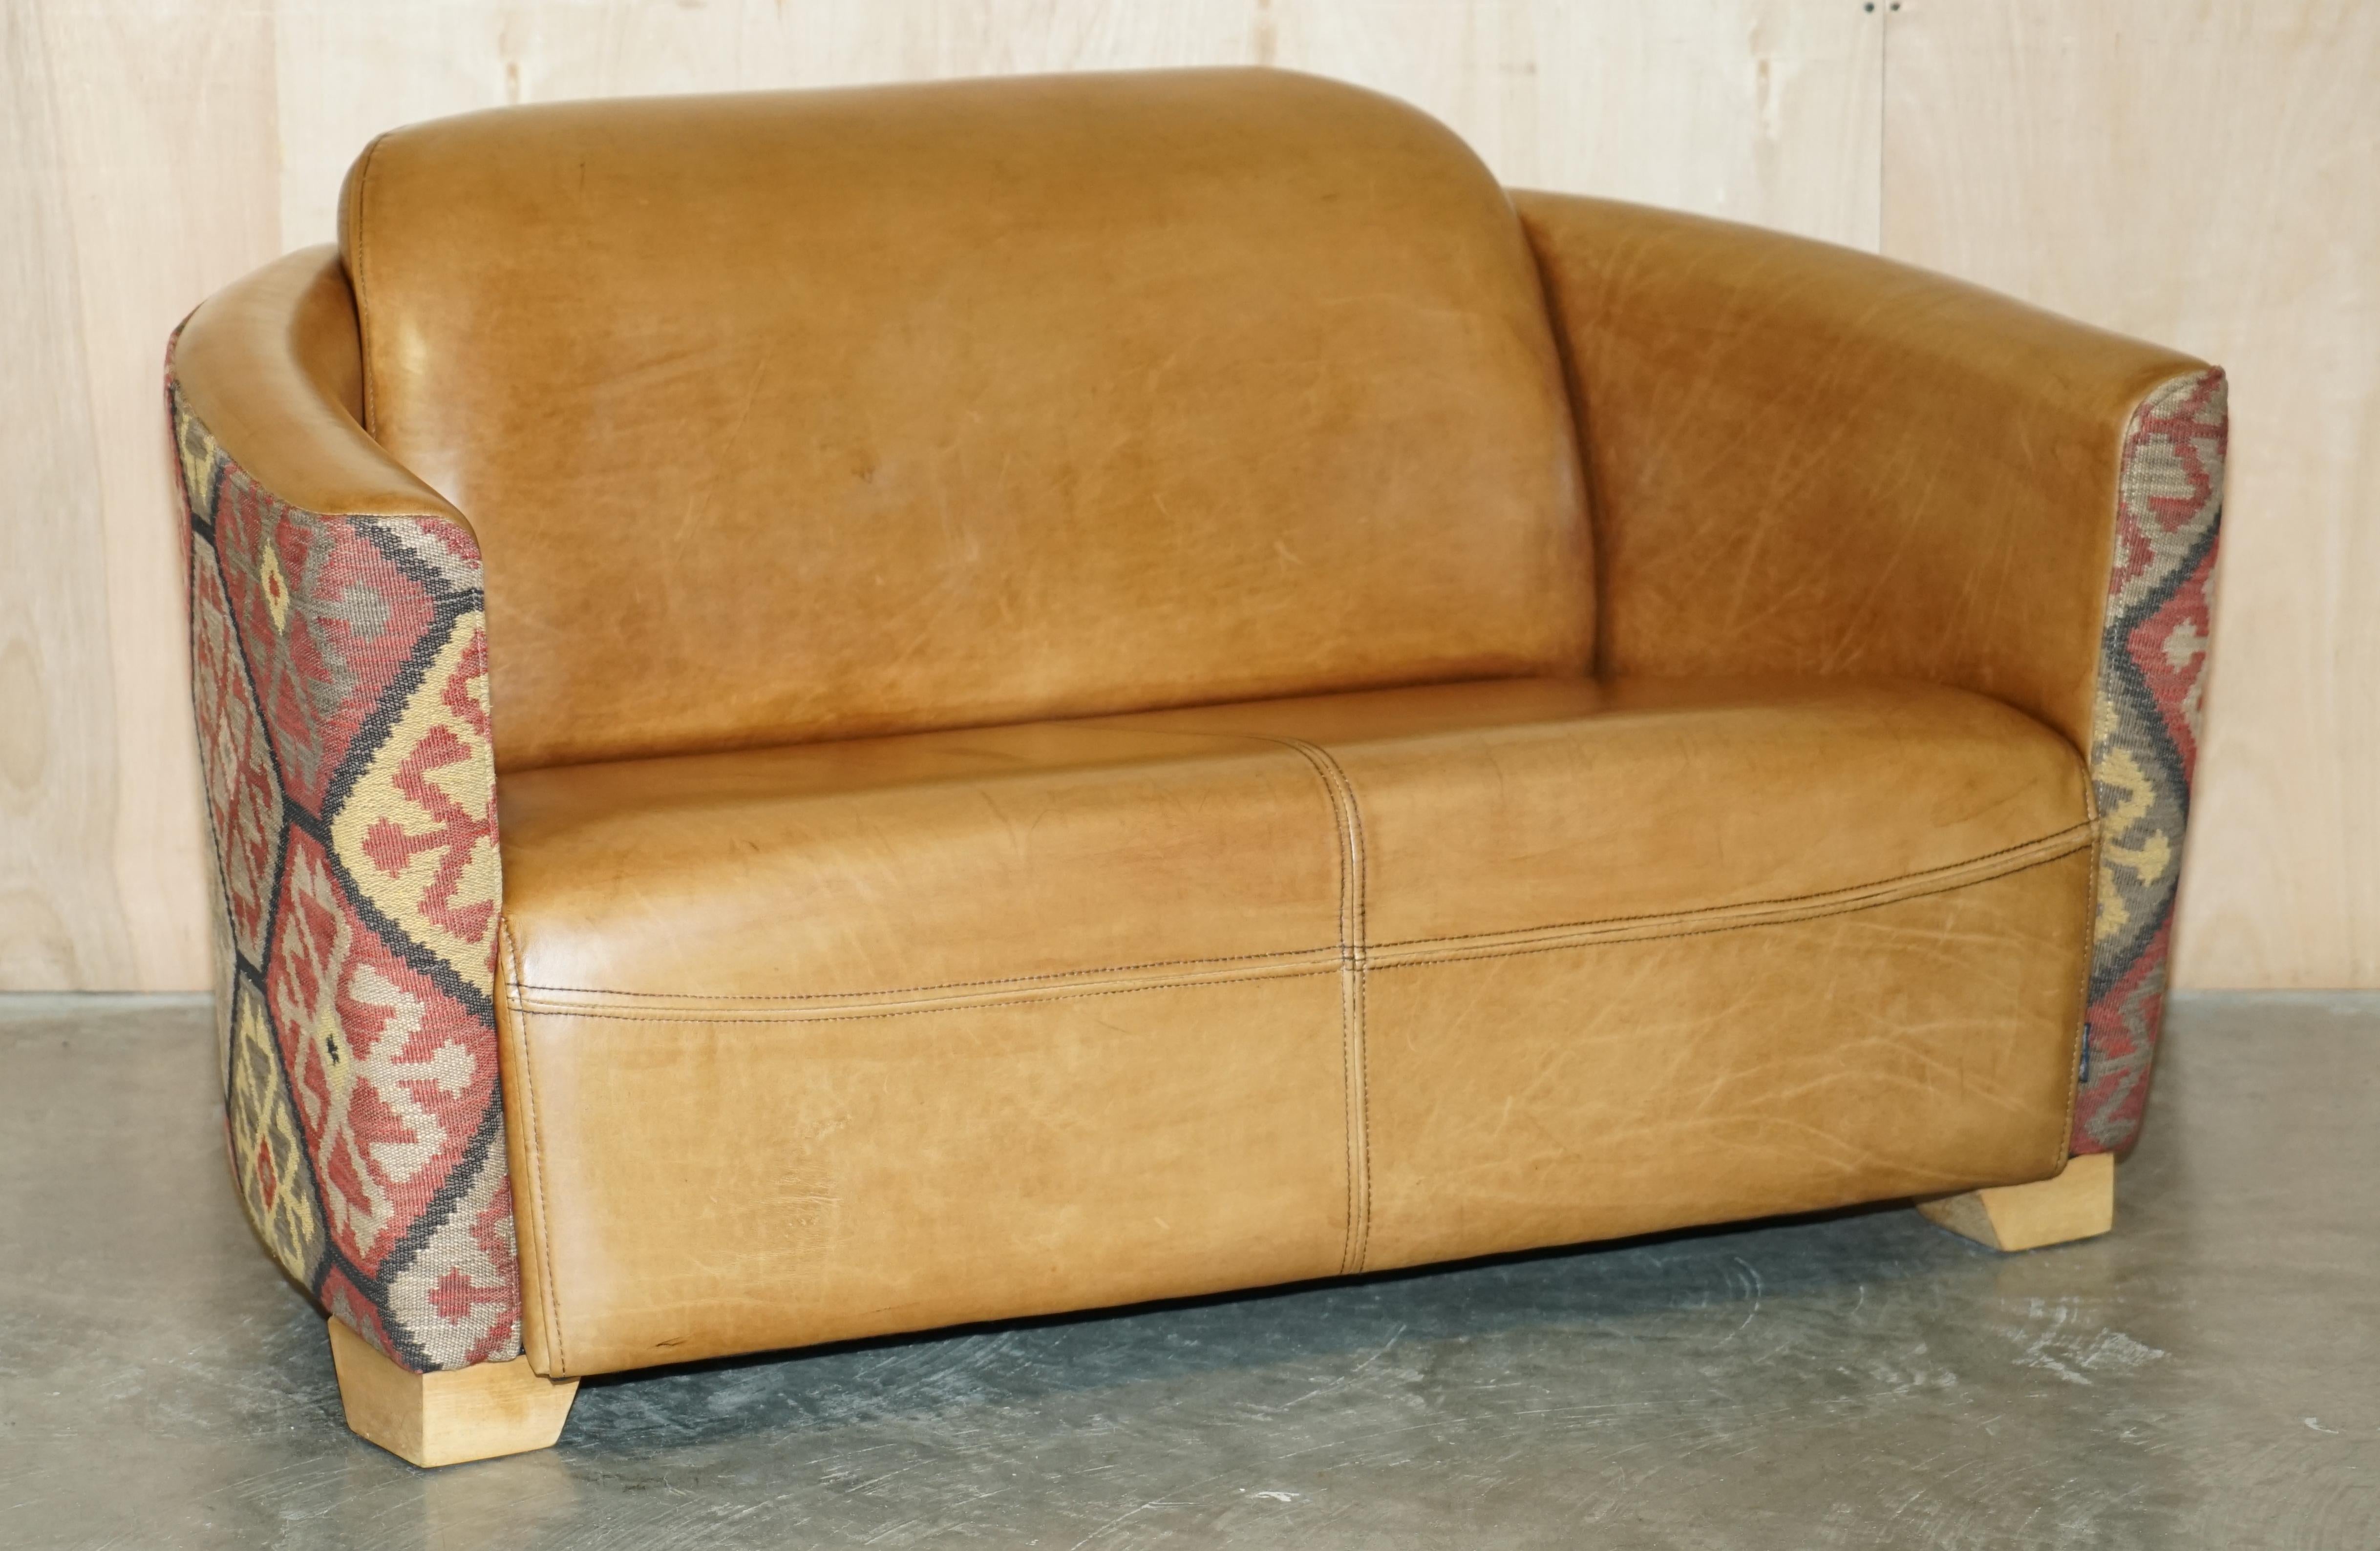 Royal House Antiques

Royal House Antiques is delighted to offer for sale this stunning, hand dyed brown leather mixed with Kilim upholstery, three piece Rocket suite 

Please note the delivery fee listed is just a guide, it covers within the M25